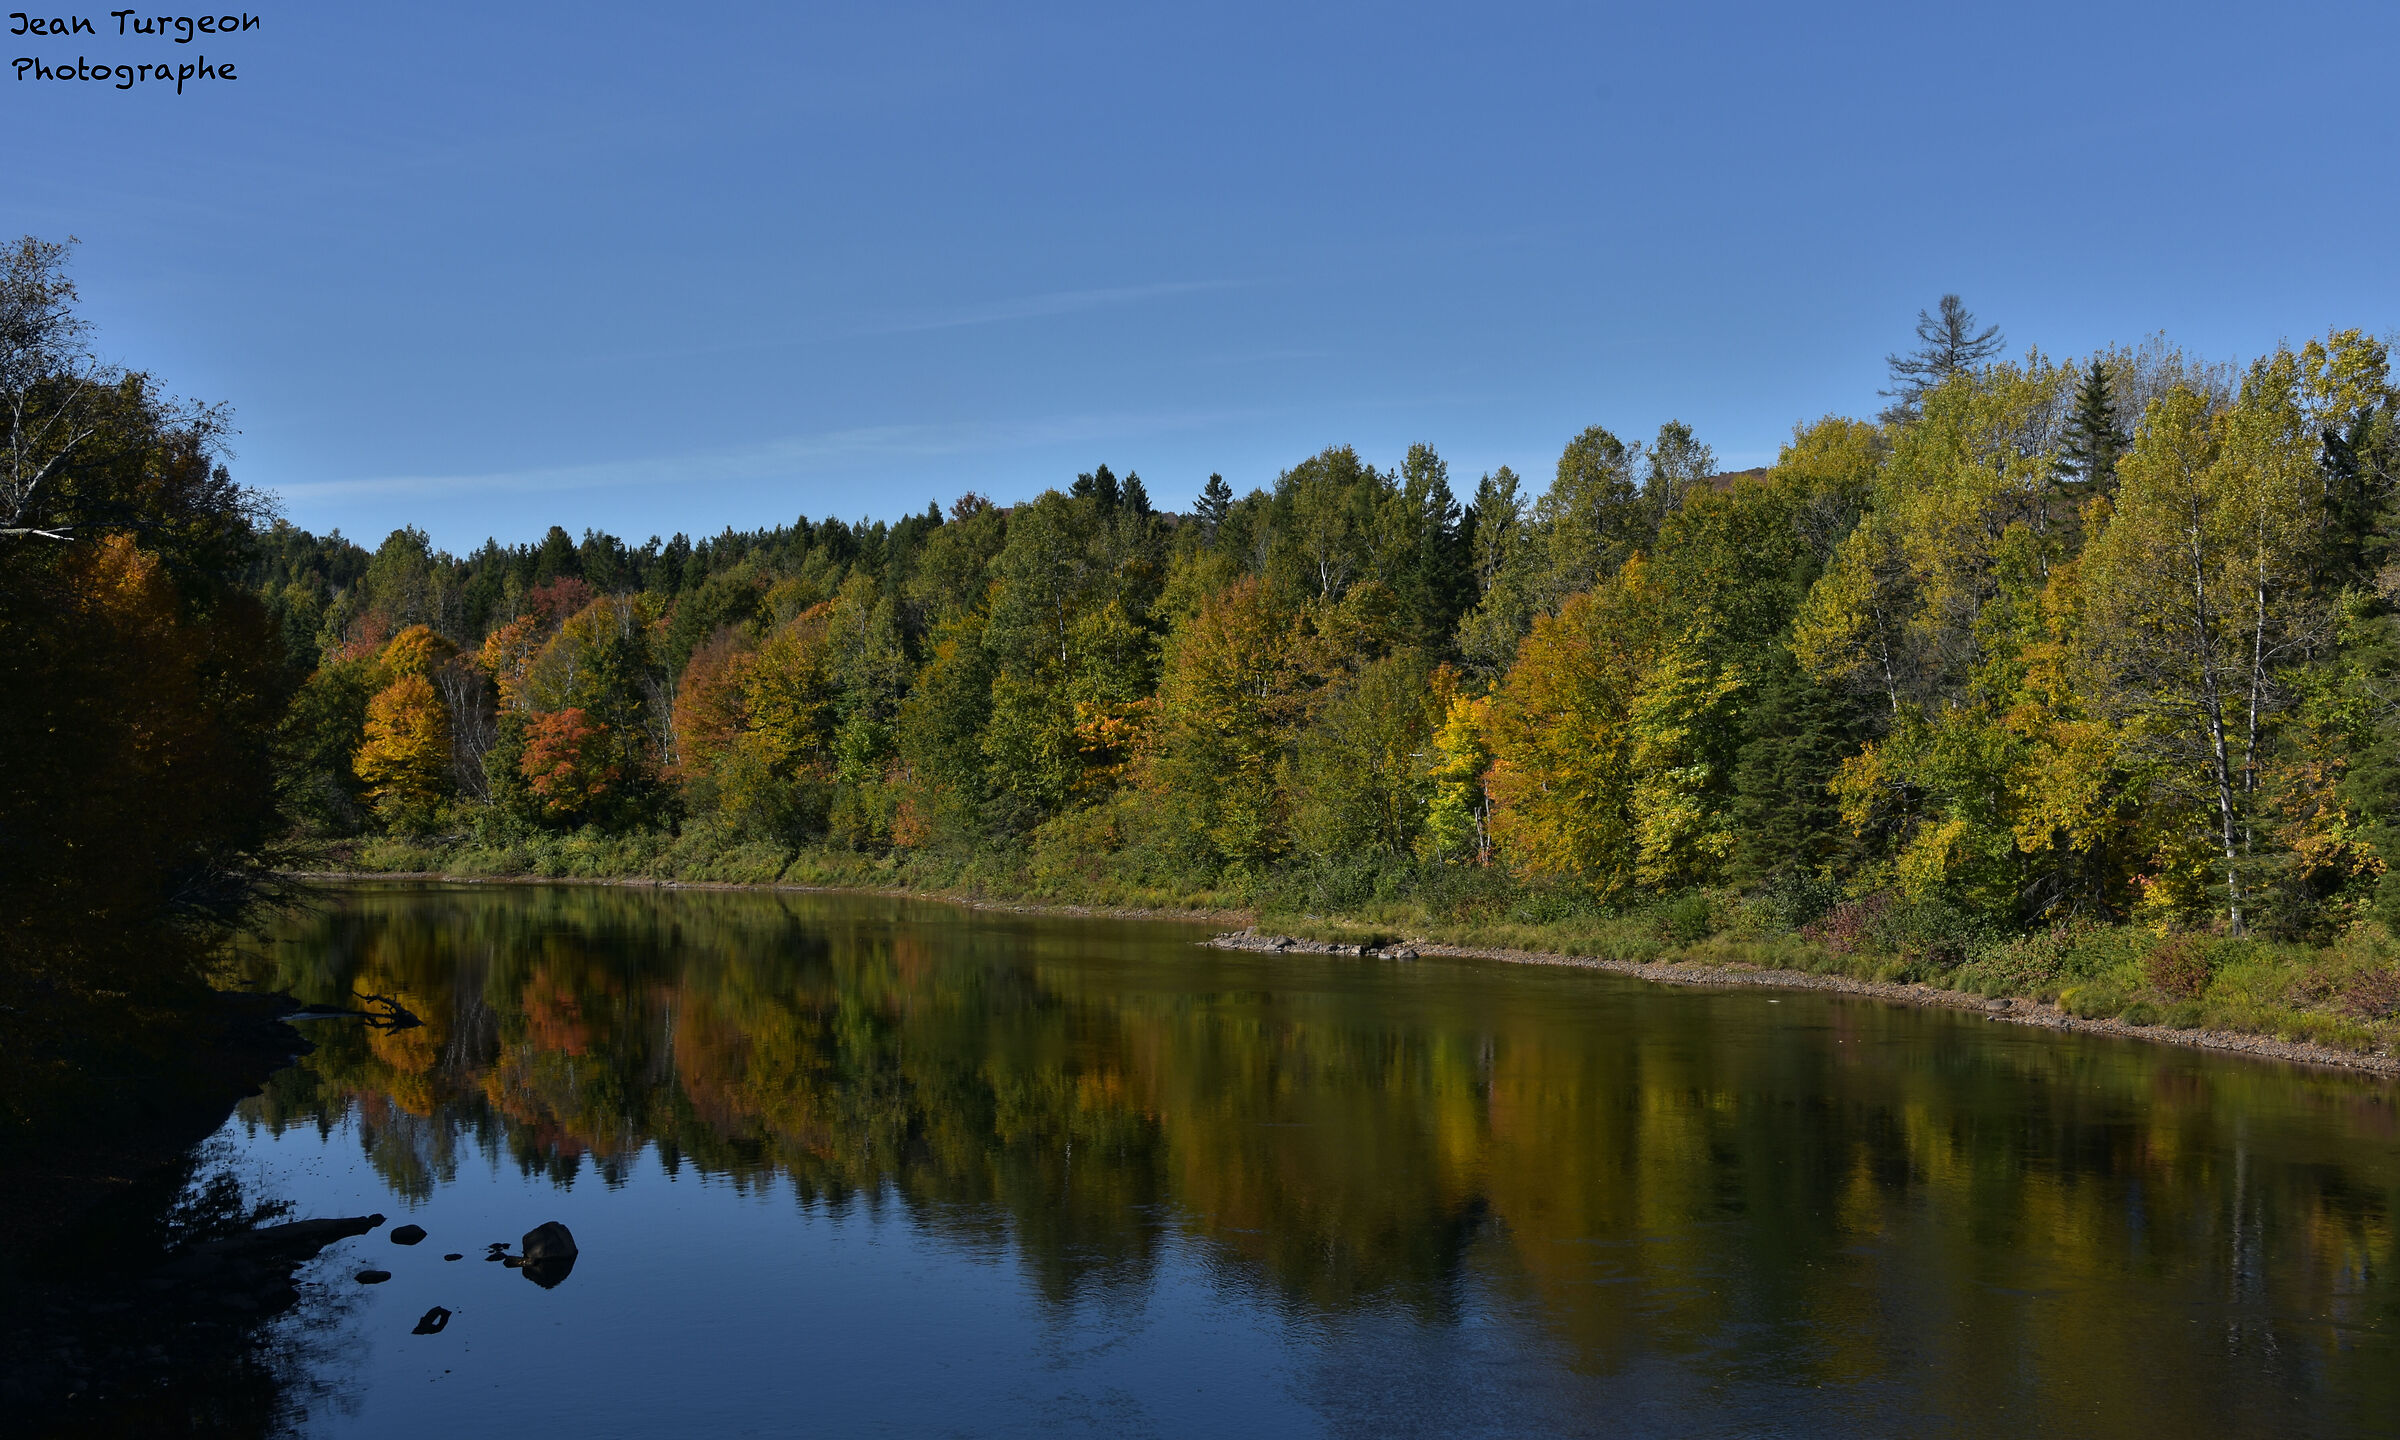 Autumn landscape with the colors before winter - Quebec...